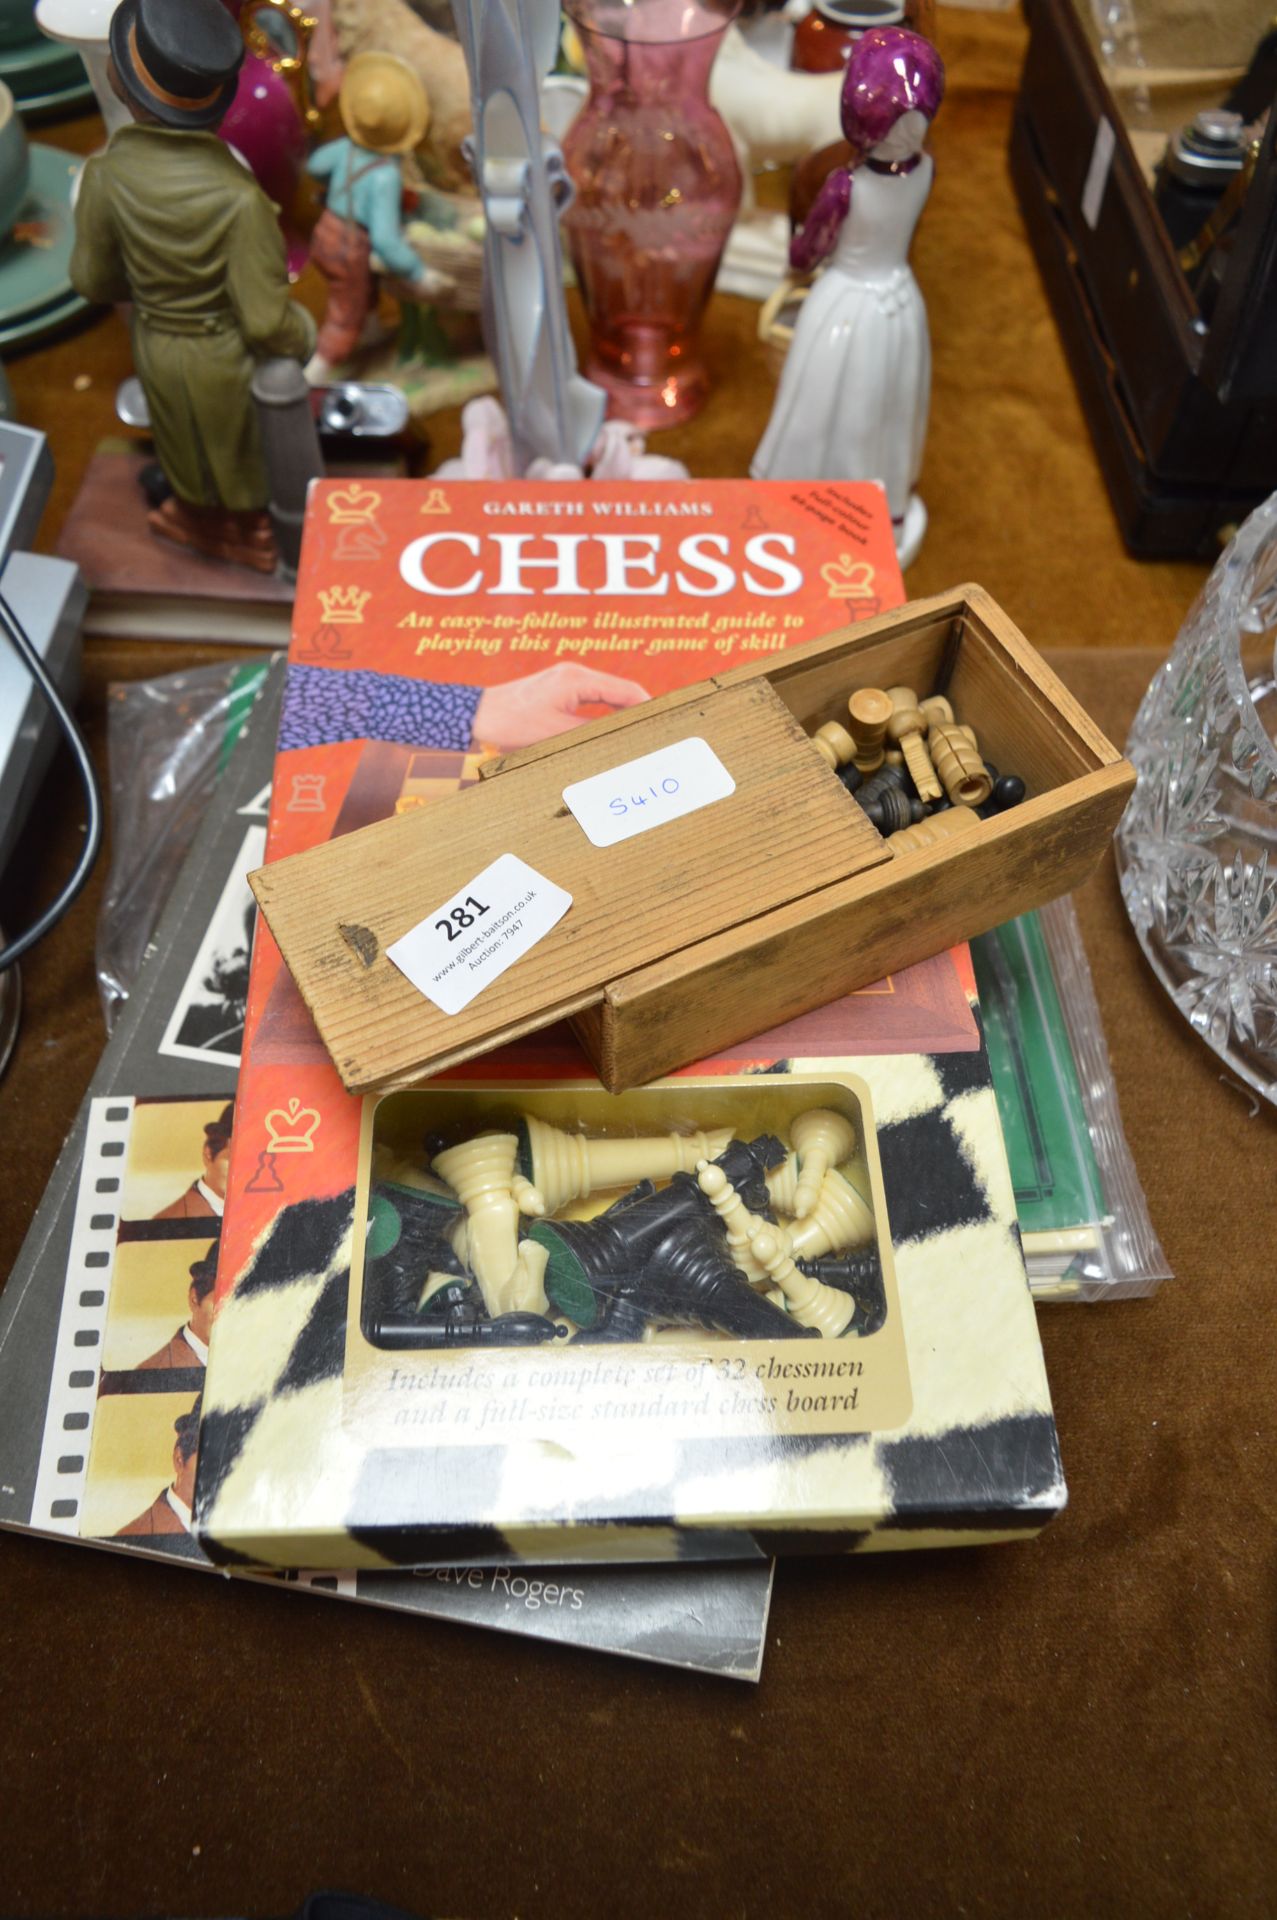 Two Chess Sets and Two Books "Mimic Cars" and "Ave